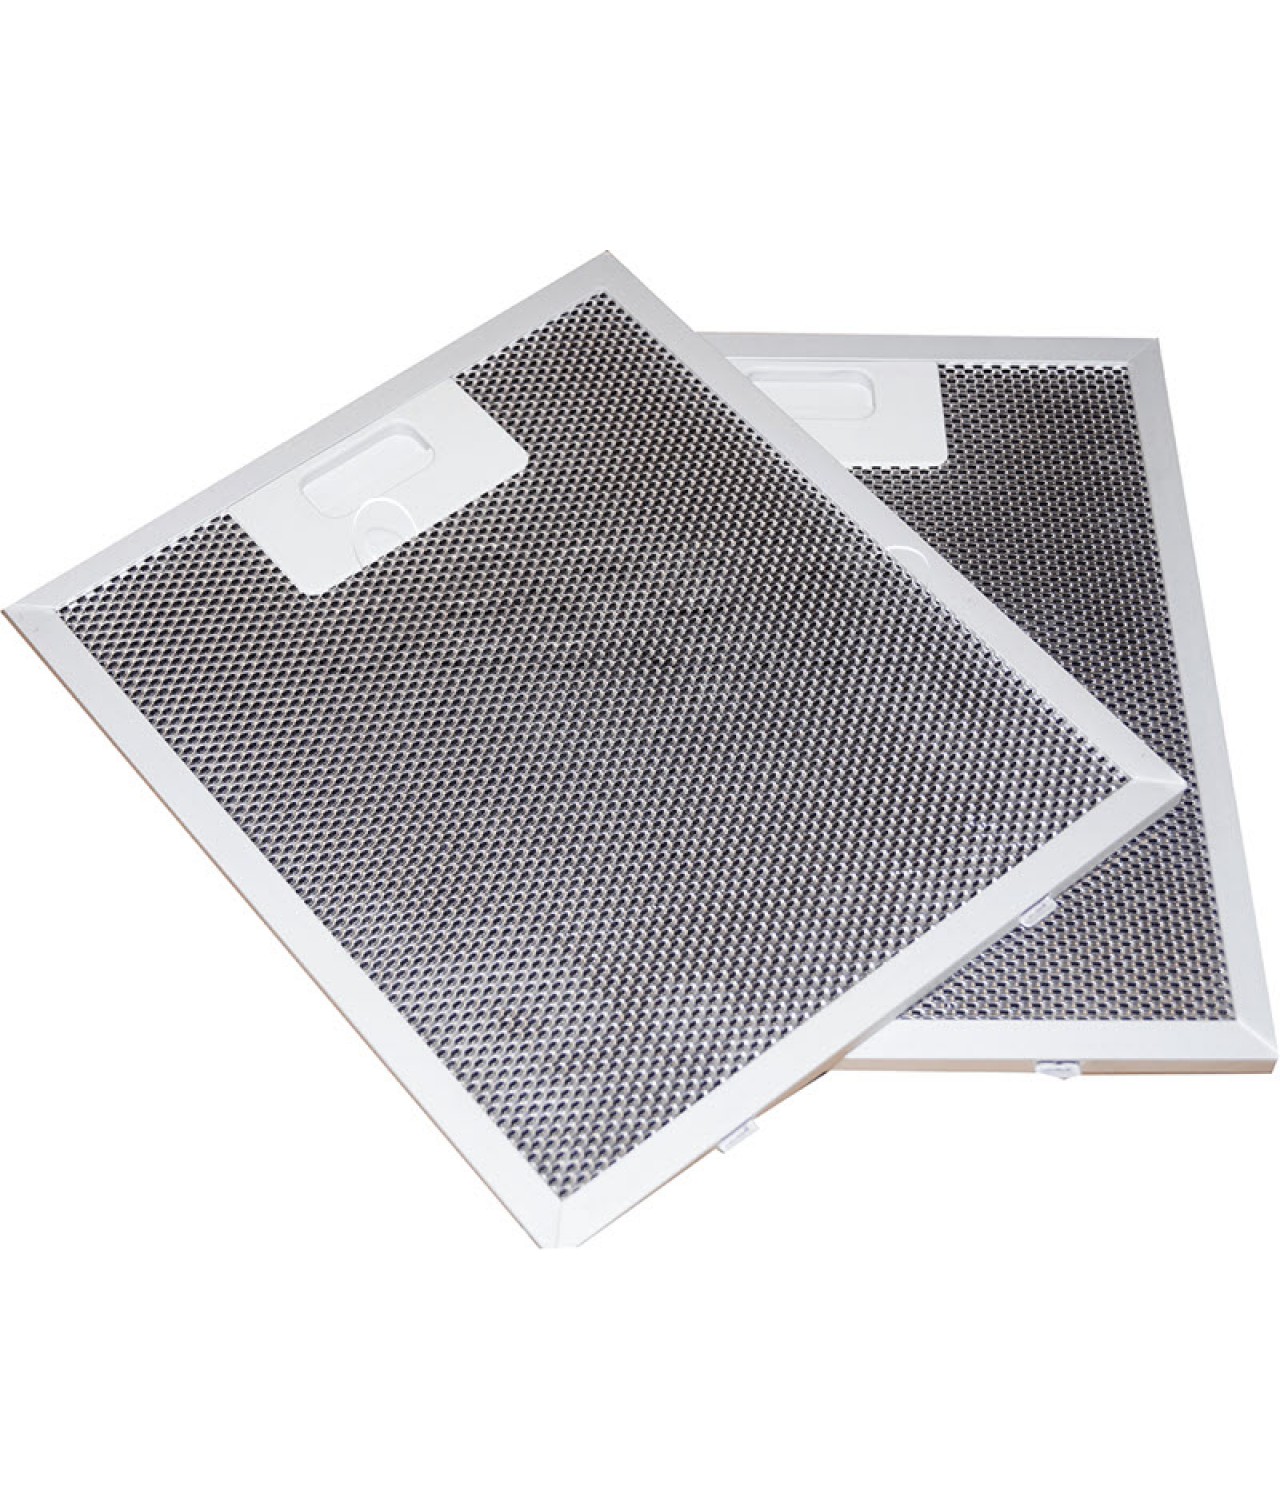 535.21.6200.9 - activated carbon filter set for recirculating cooker hood Derby 900